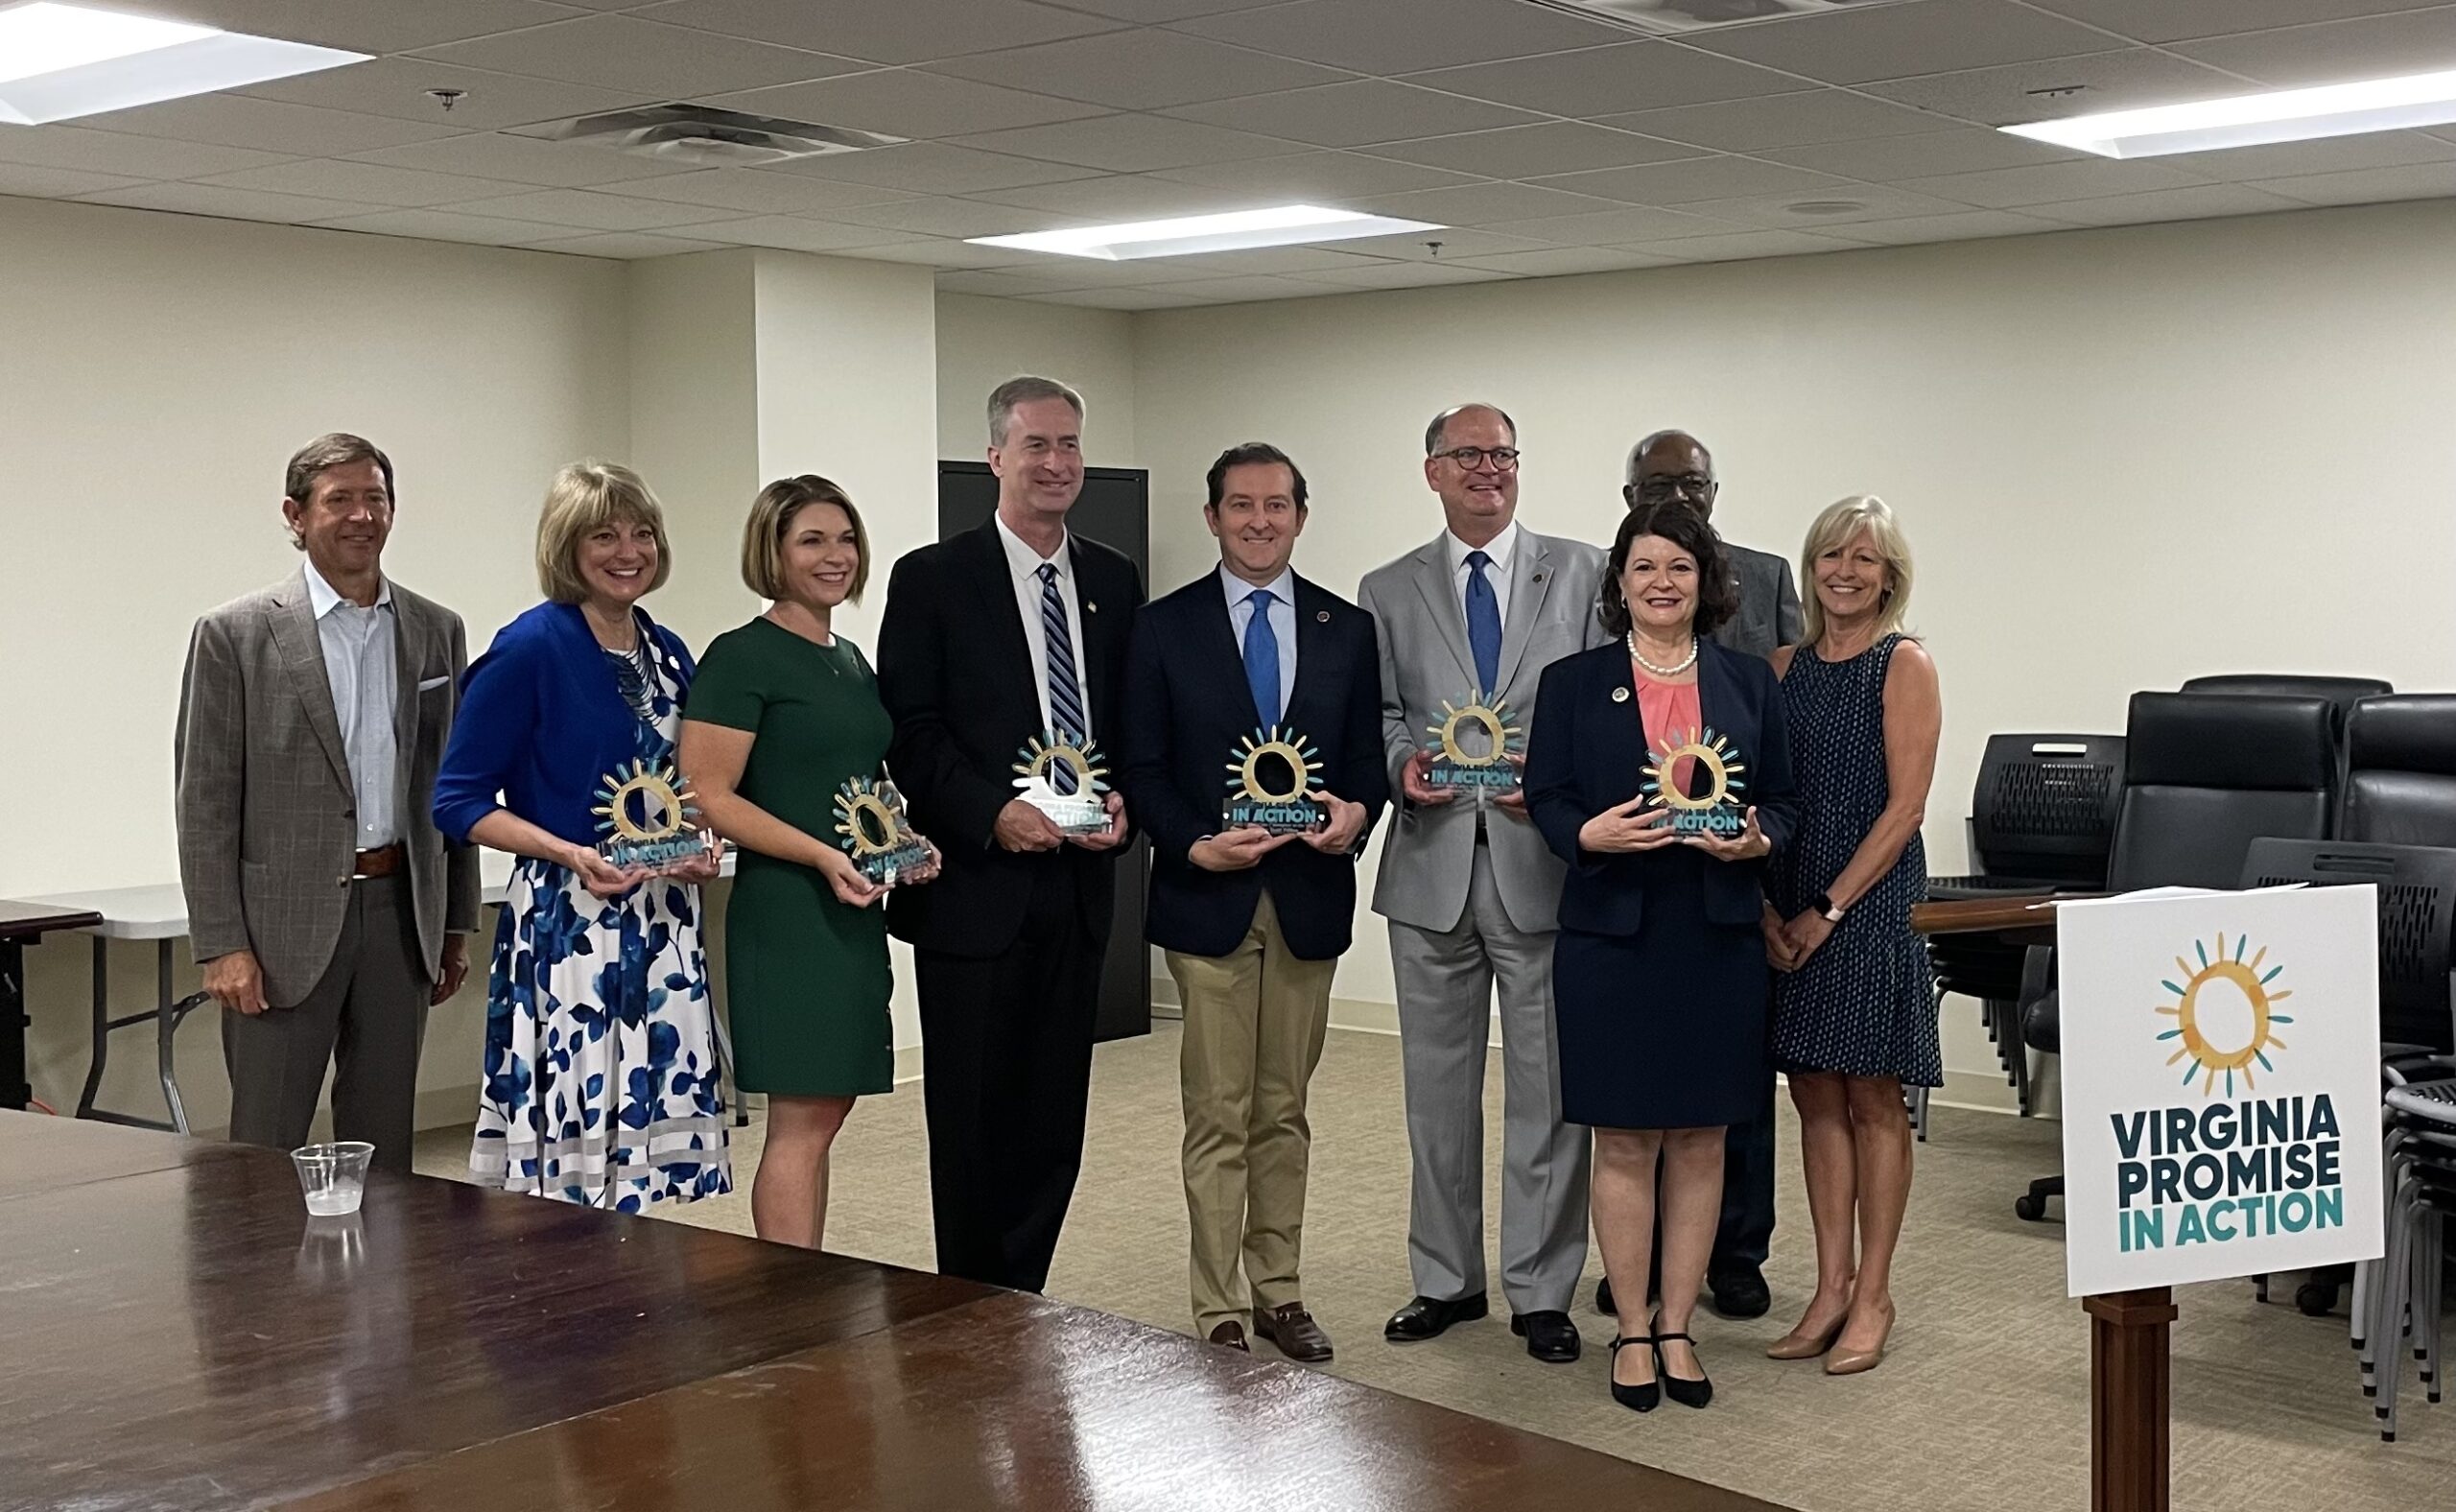 Six bipartisan legislators received Child Care Champions Awards from the Virginia Promise Partnership at an awards reception on June 1, 2022.